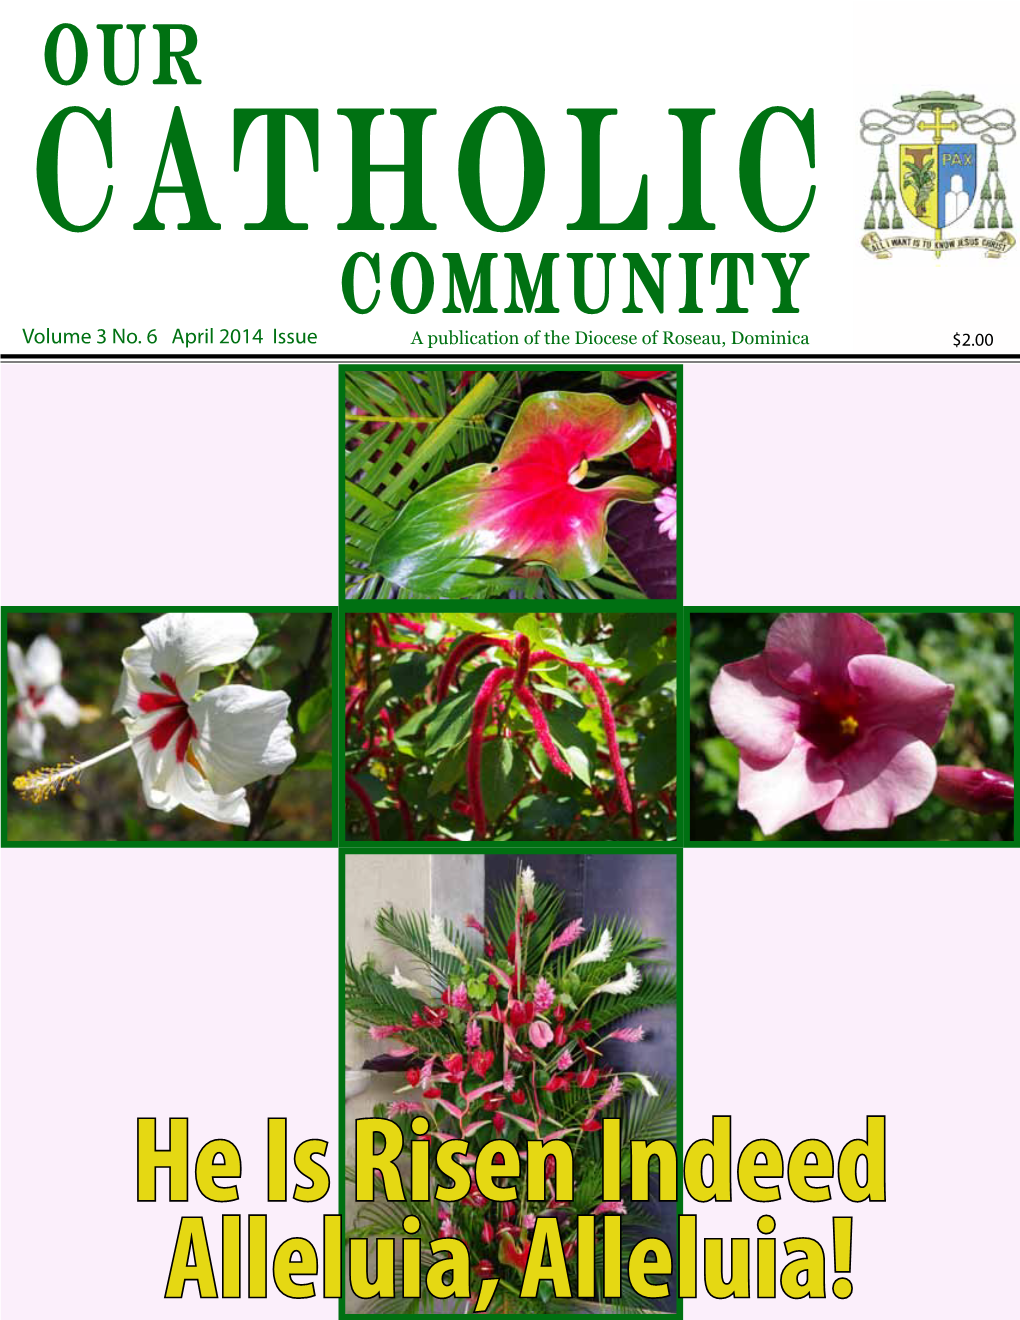 COMMUNITY April 2014 ISSUE Front Cover Photos by Fr